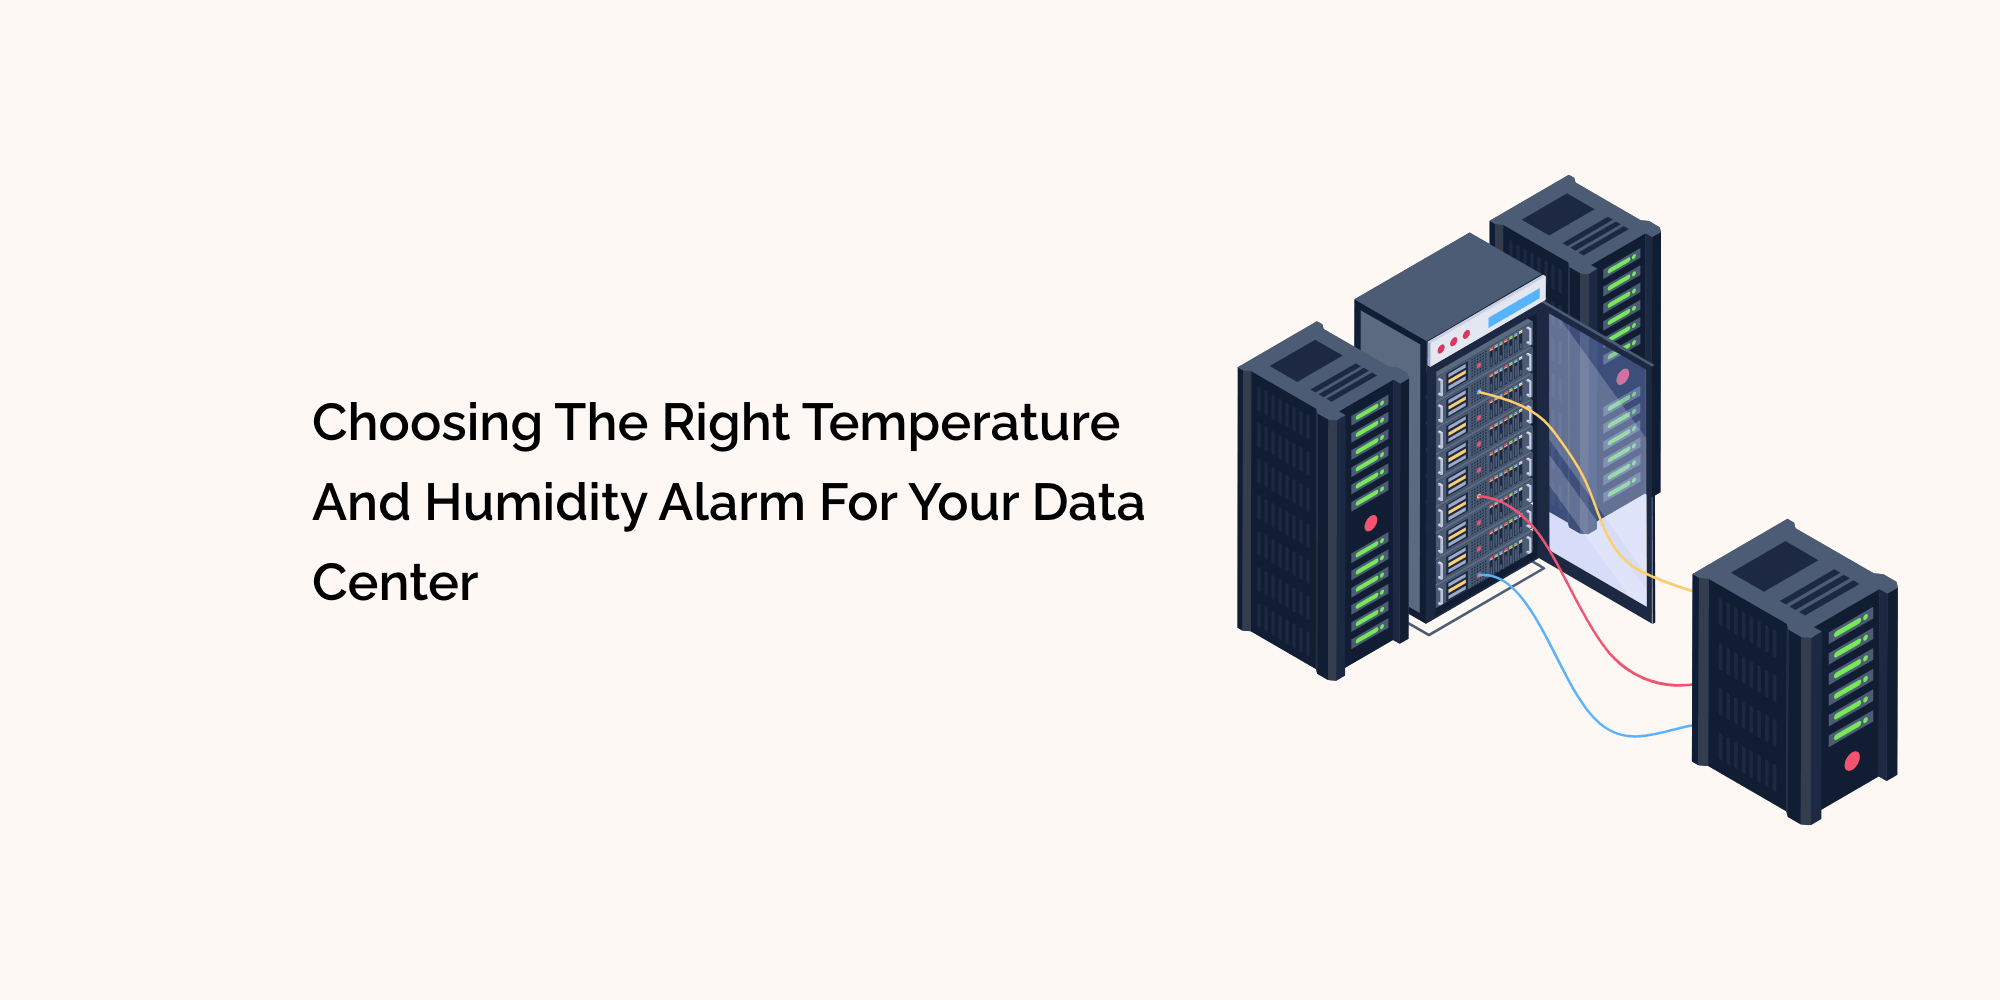 Choosing the Right Temperature and Humidity Alarm for Your Data Center